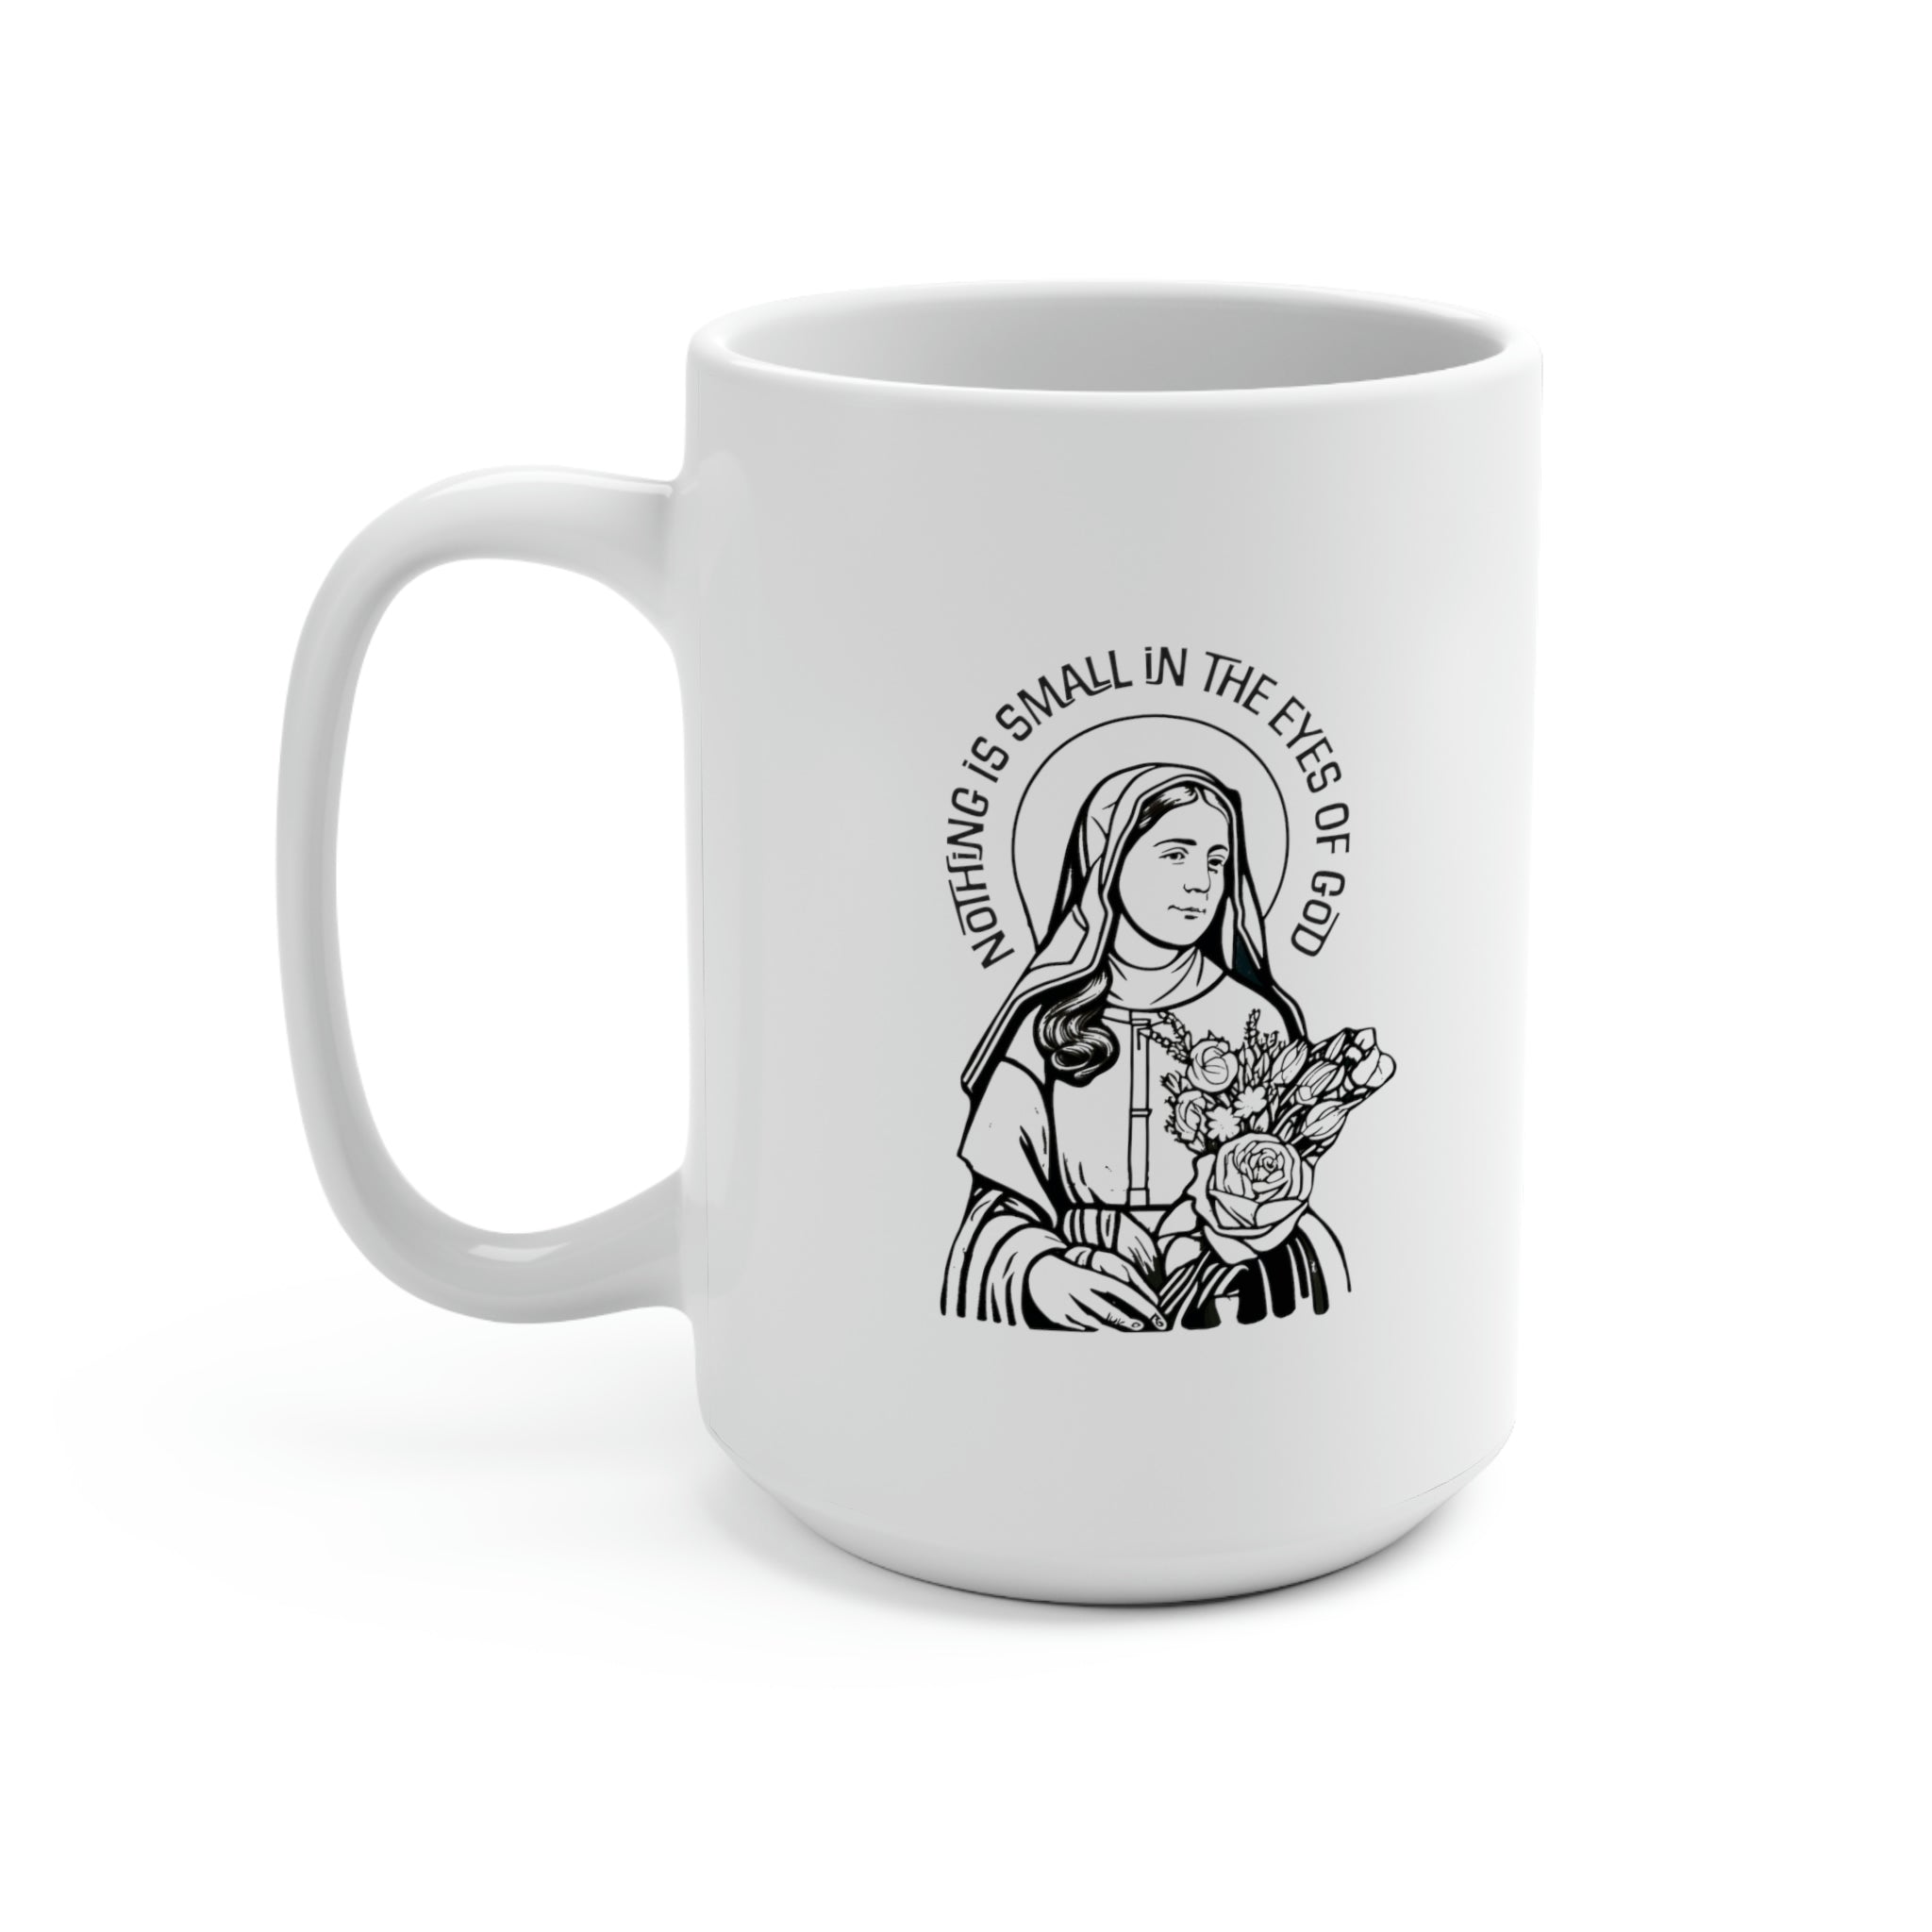 Nothing Is Small Is The Eyes Of God Coffee Mug 15oz